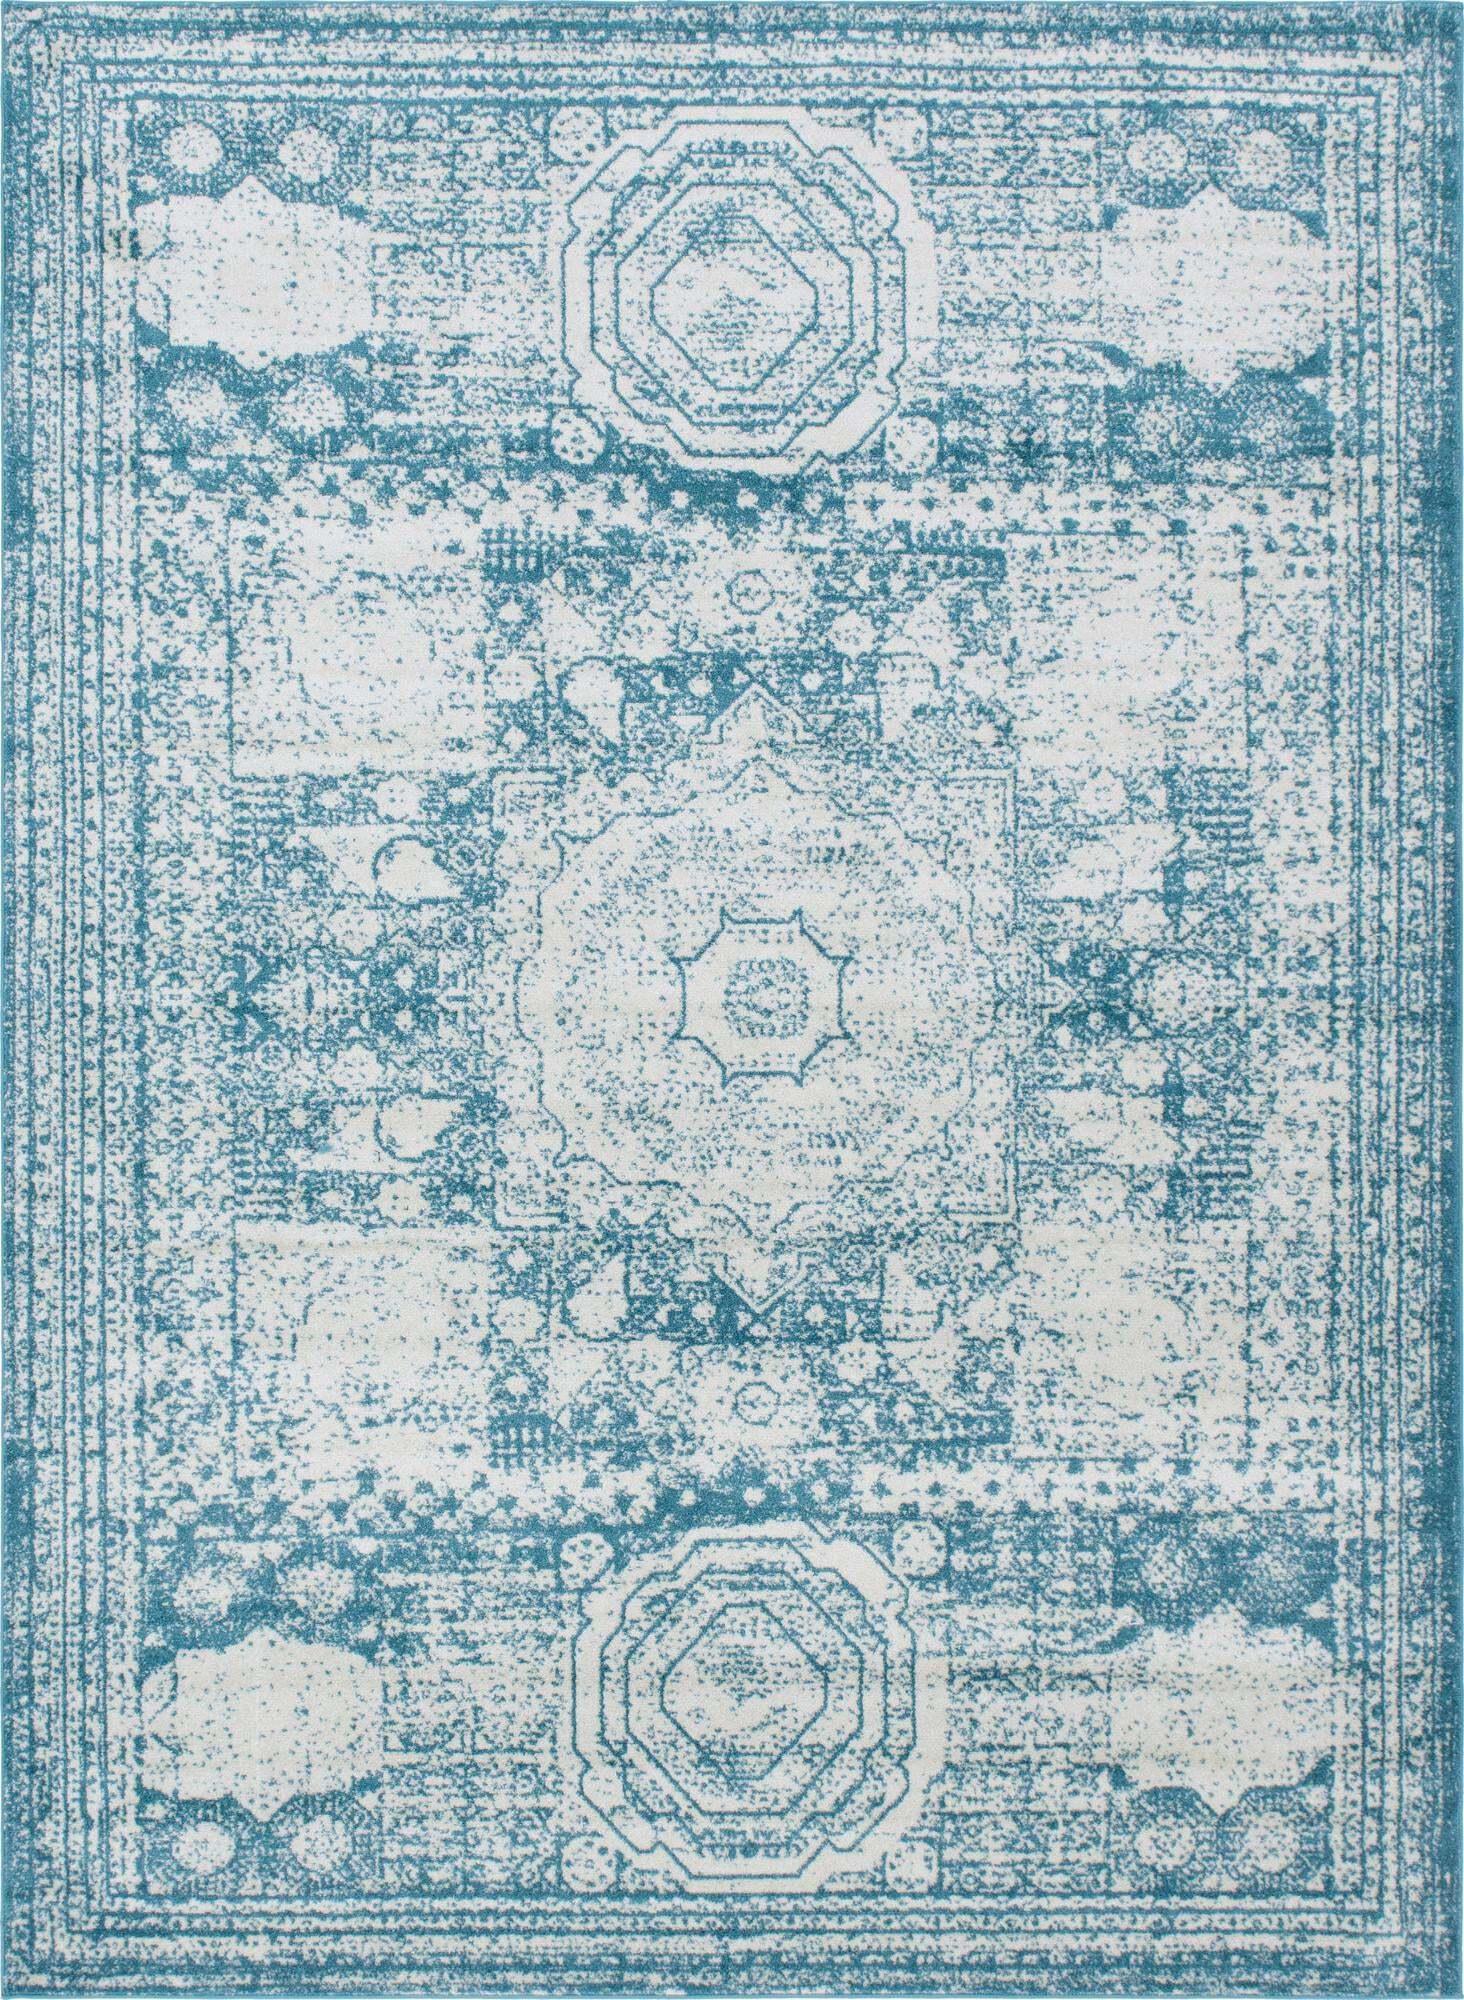 Unique Loom Indoor Rugs - Bromley Border Rectangular 9x12 Rug Turquoise & Ivory